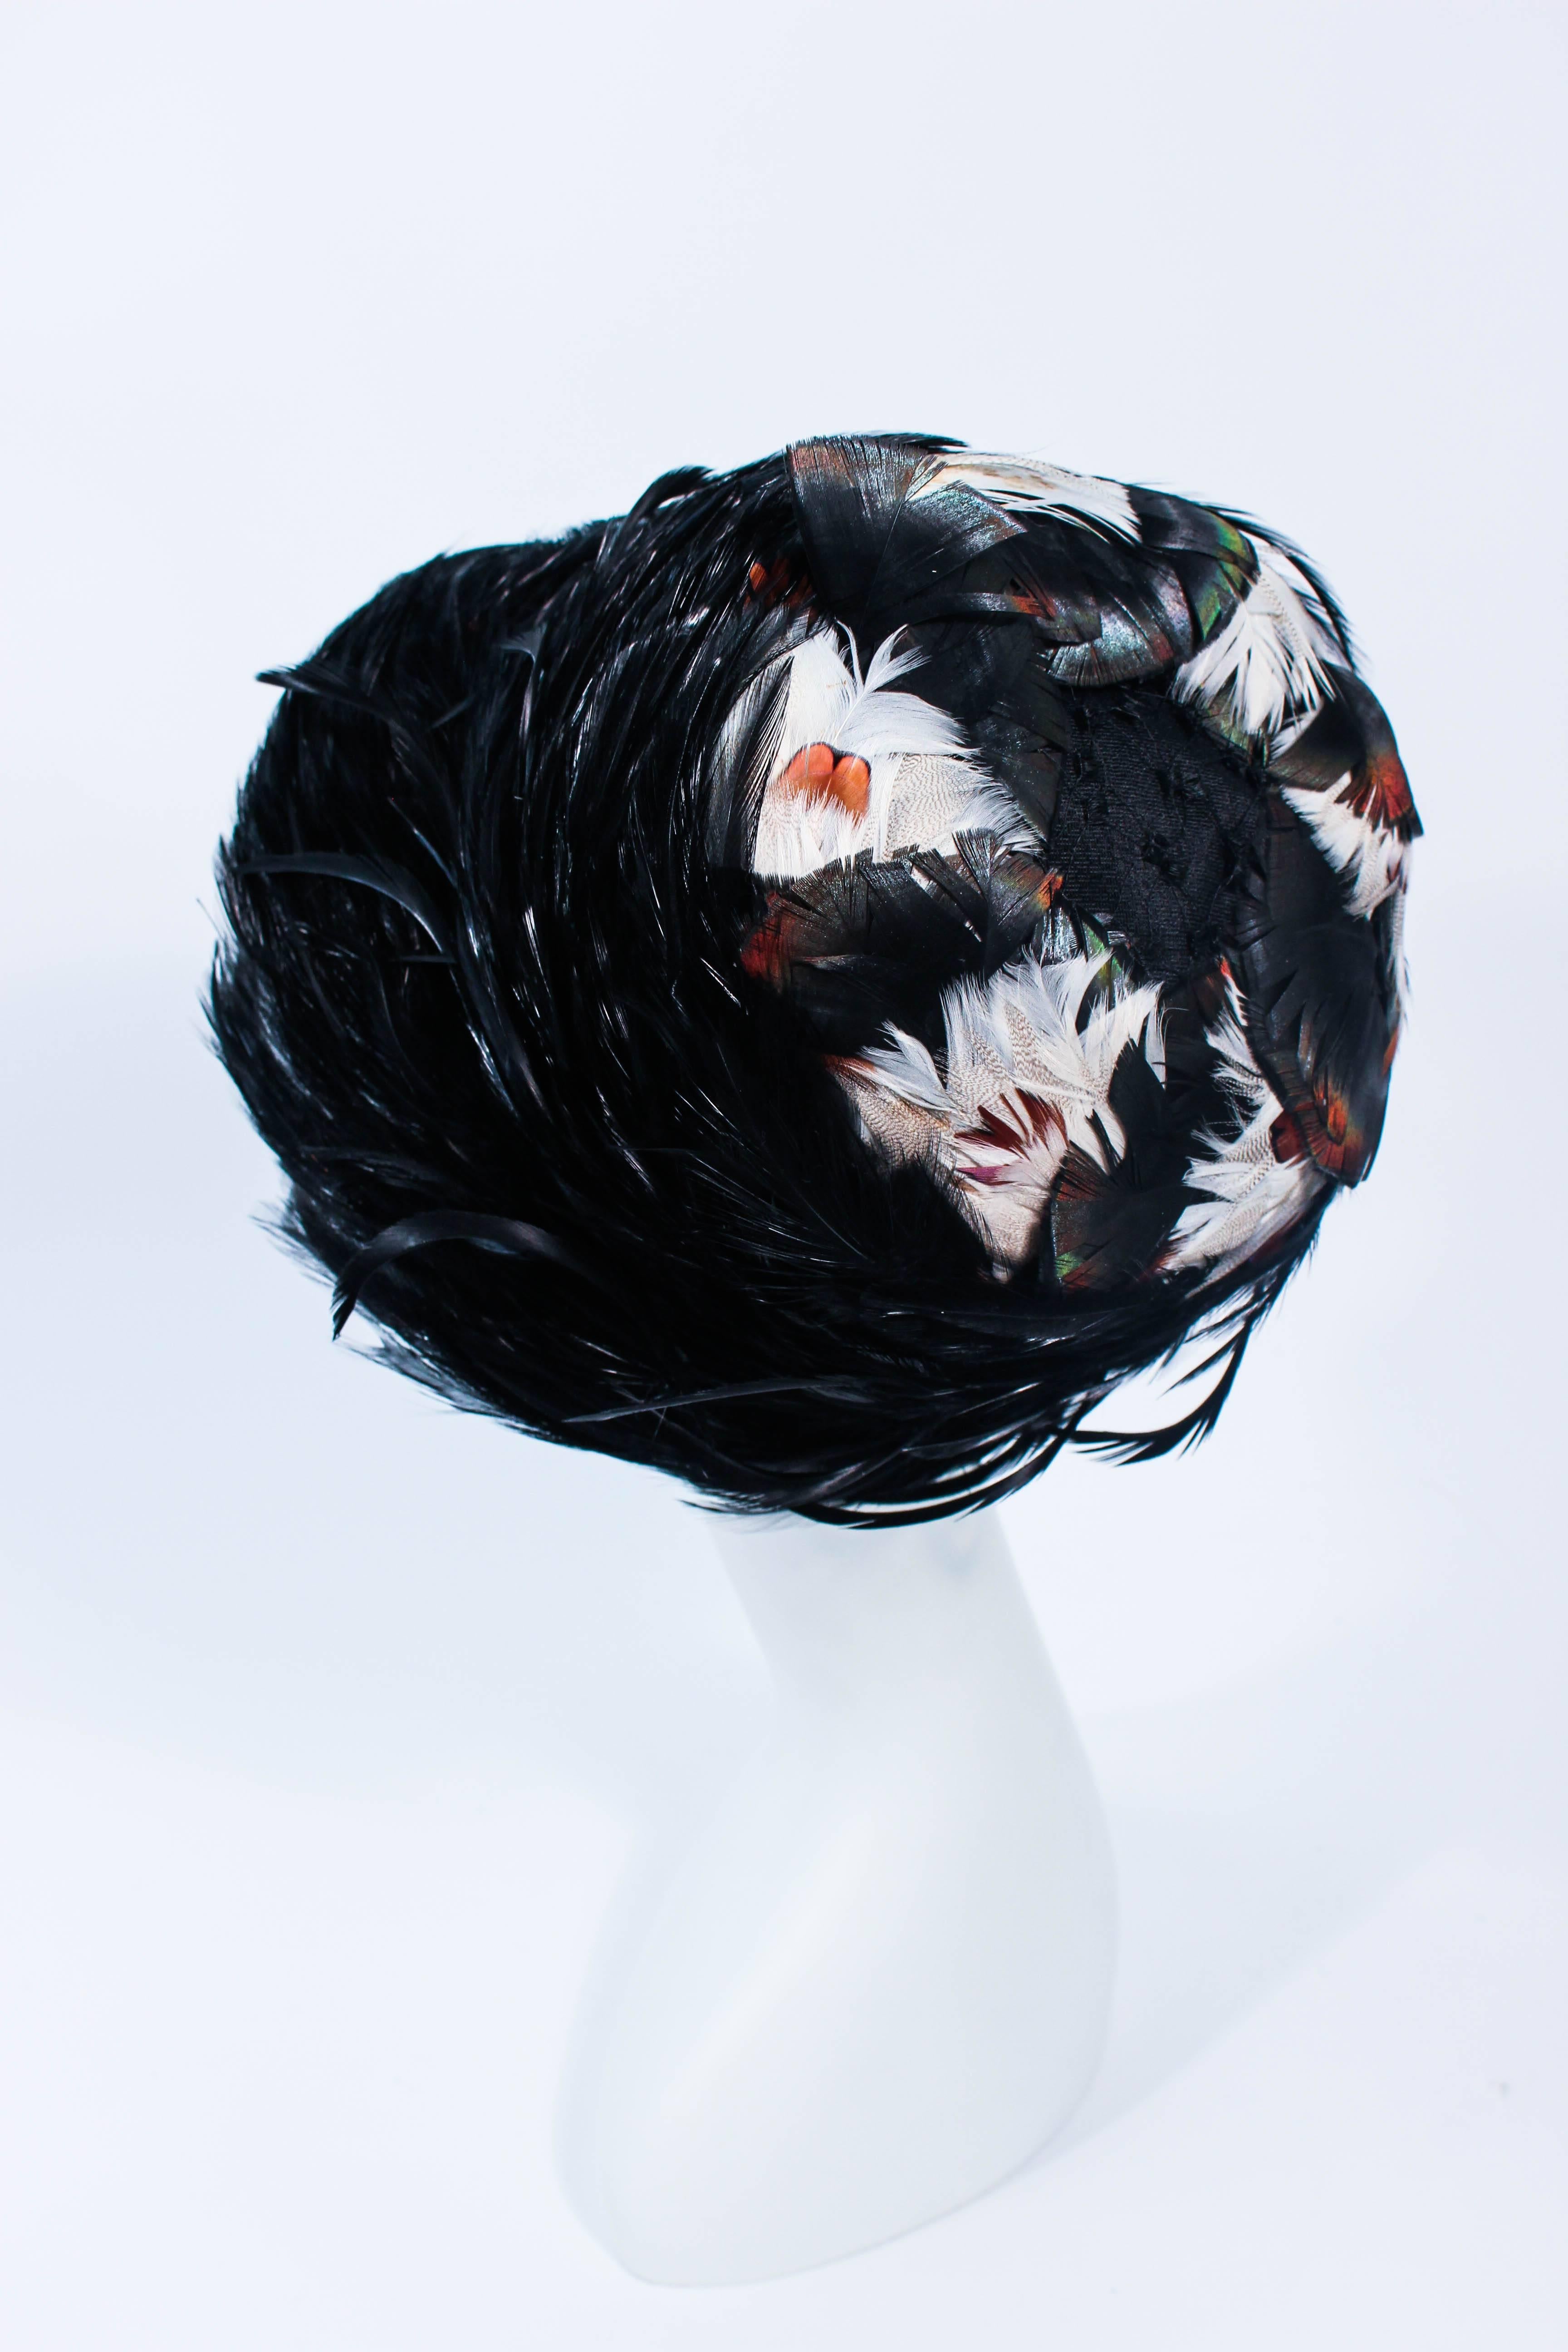 This Christian Dior hat is composed of a wonderful blend of black and cream feathers. Features a vibrant swooping swirl feather design. Made in France. 

Measures (Approximately)
Circumference: 20 7/8